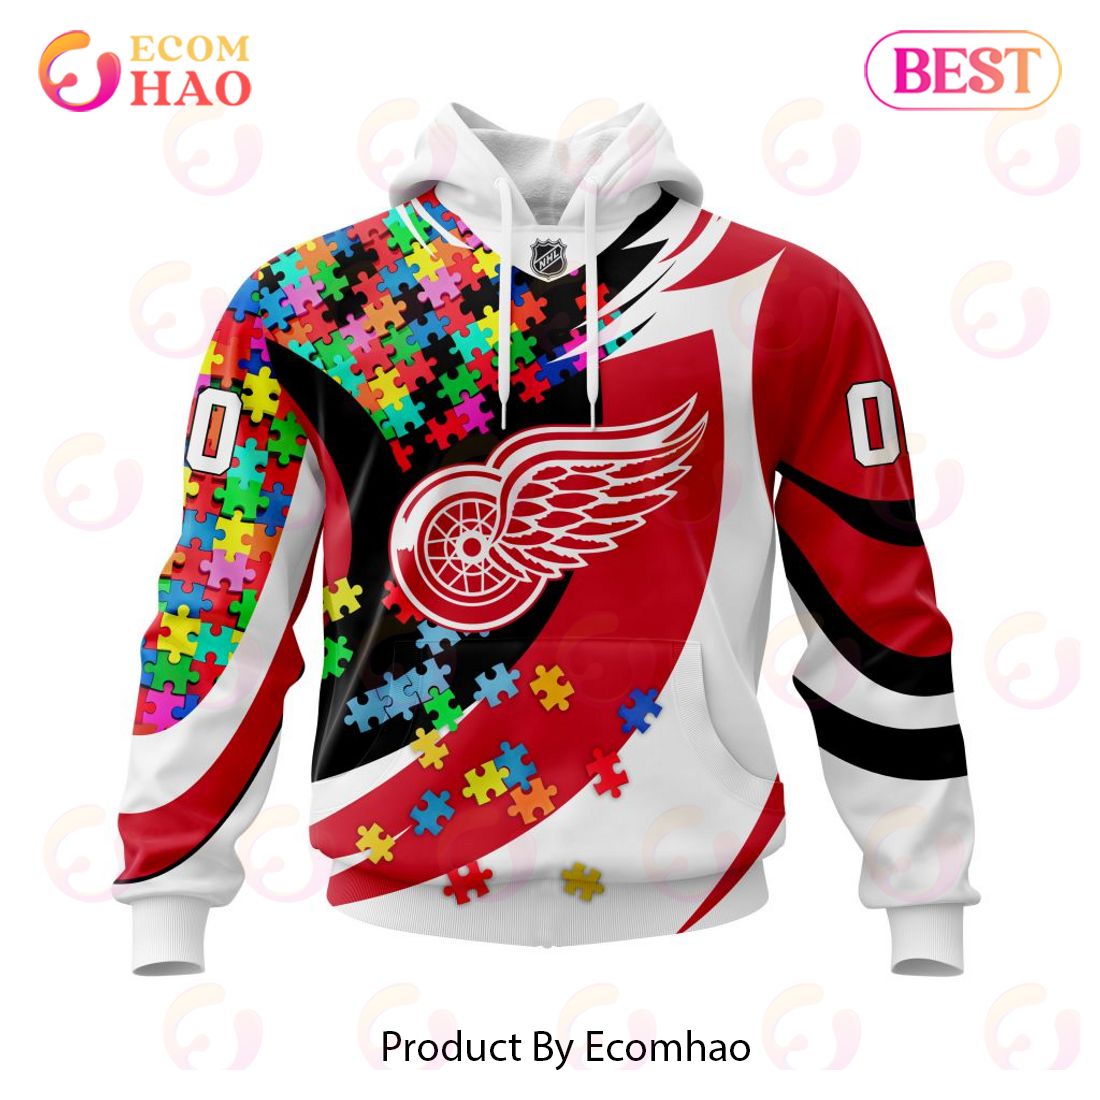 Nhl Detroit Red Wings Reverse Retro 3D Hockey Jerseys Personalized Name  Number